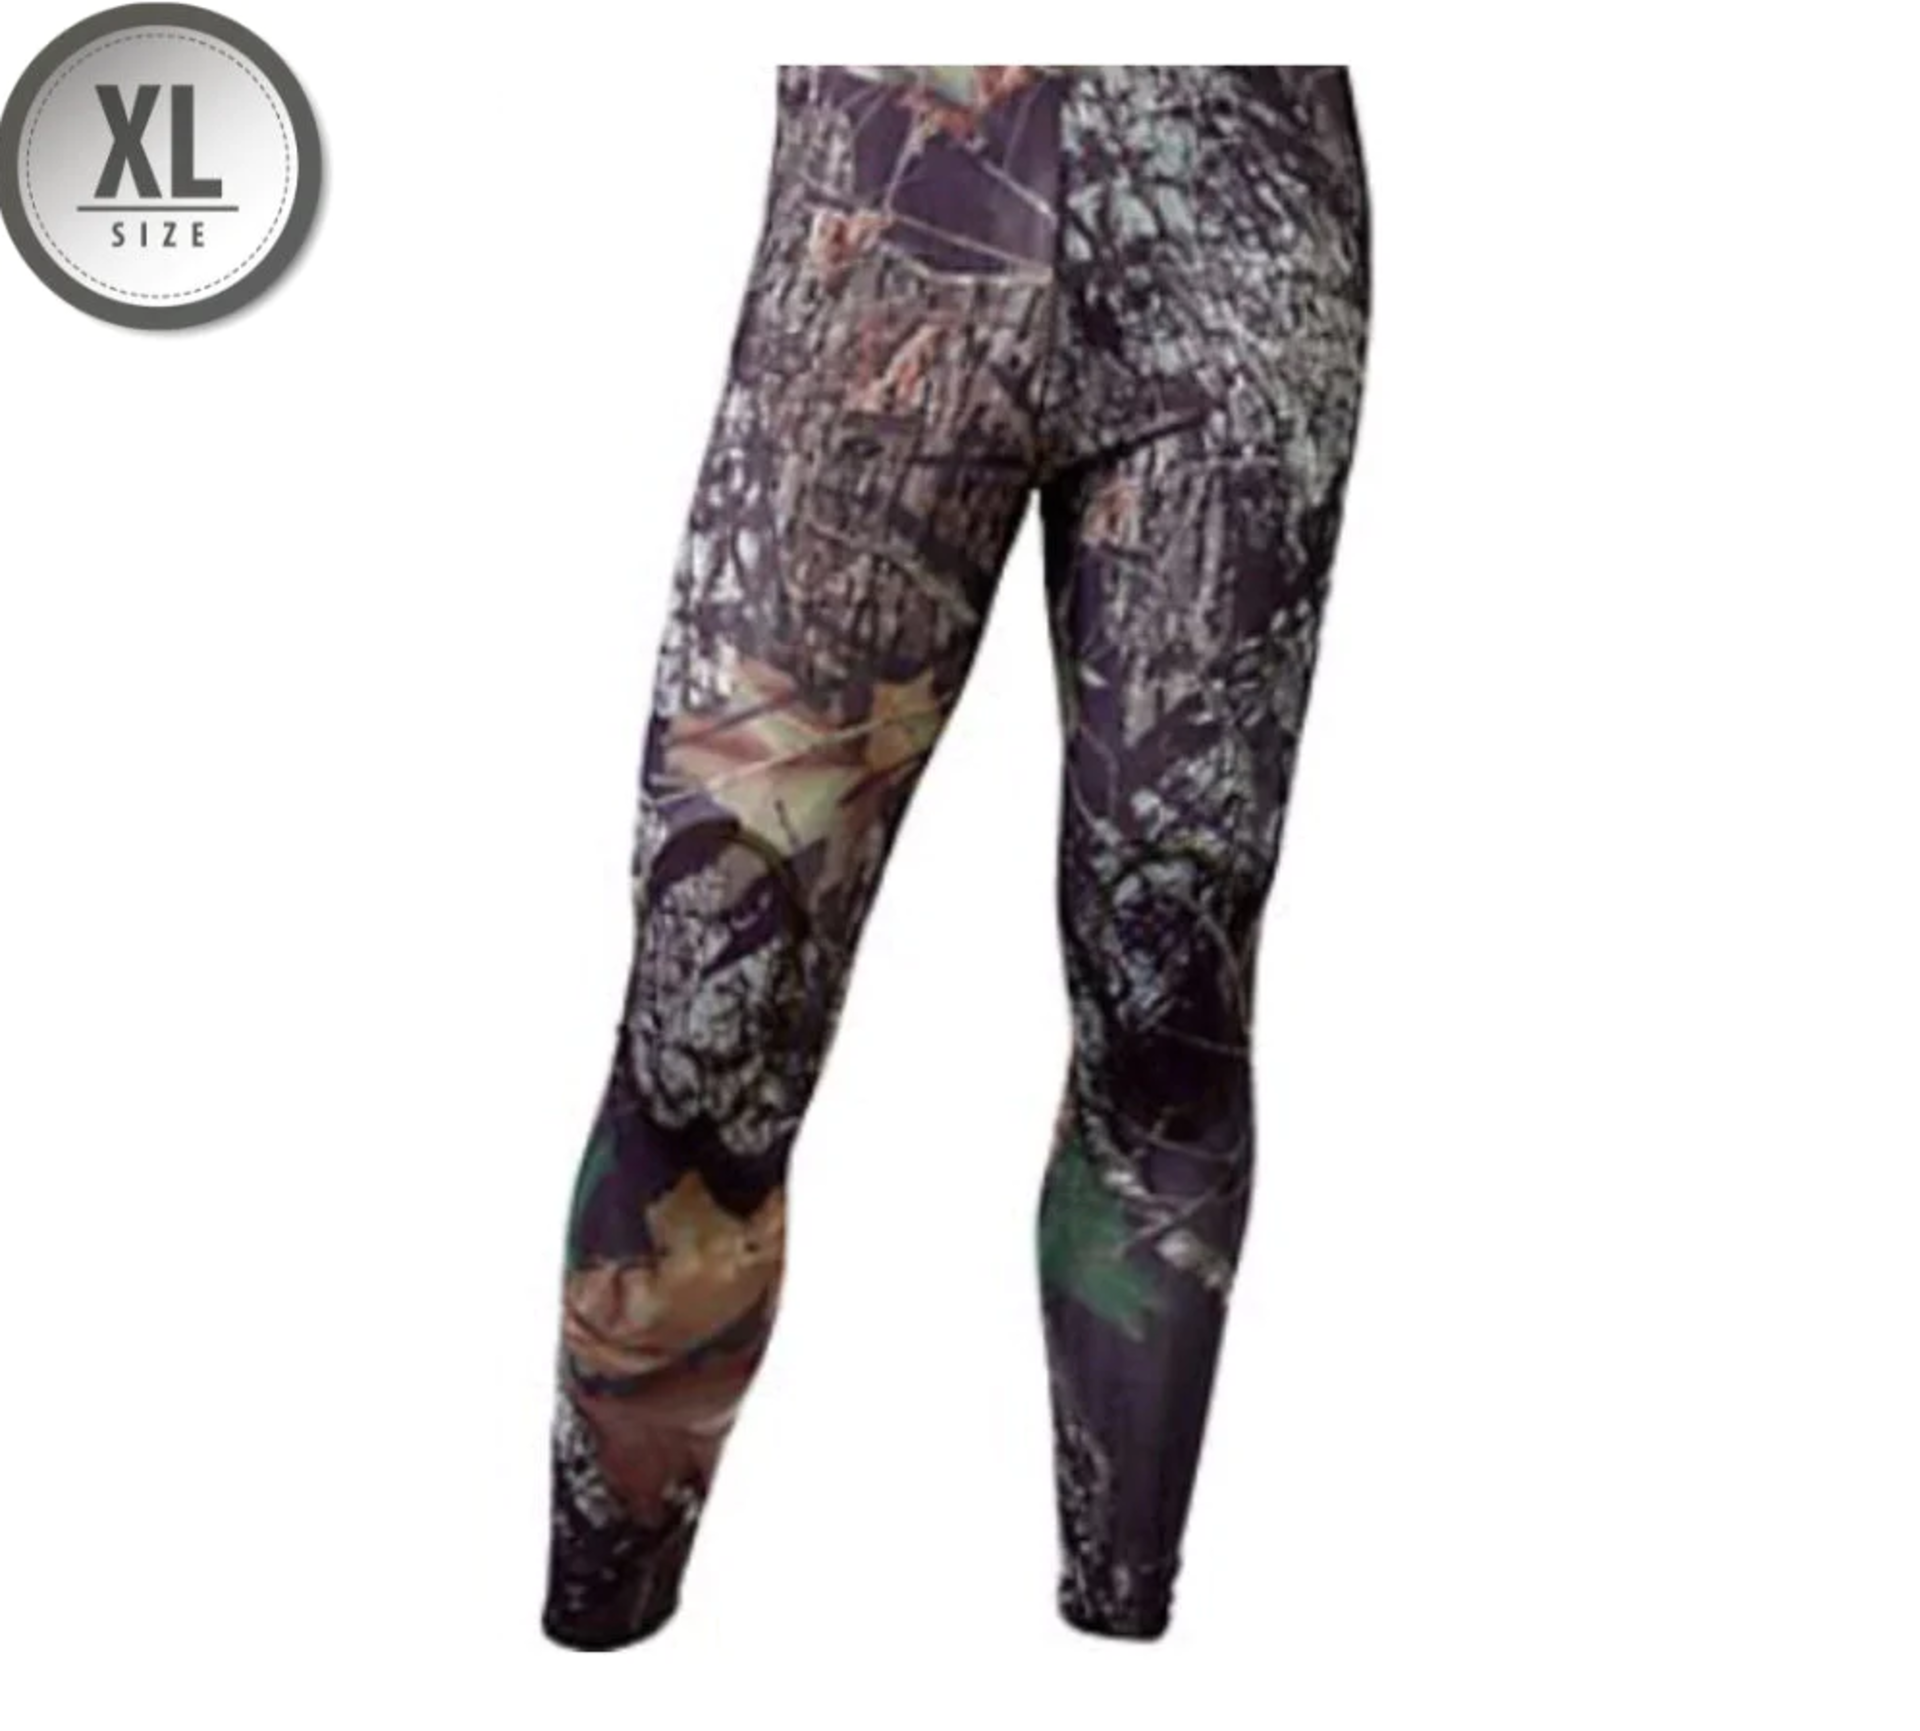 Rynoskin Hunting and Outdoor Pants - Mossy Oak